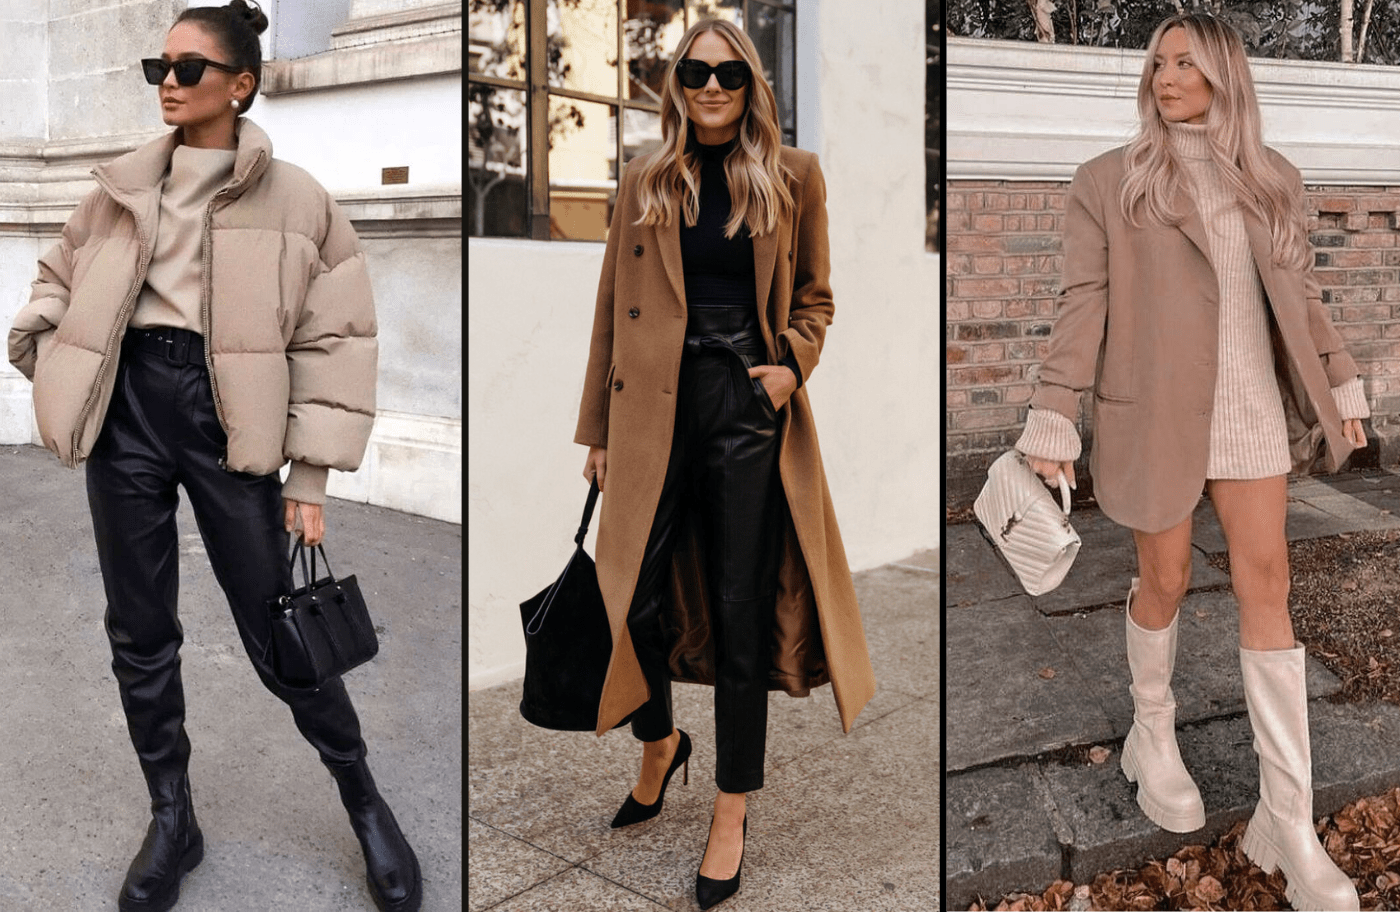 Winter Travel Outfits For Women 2022 To Have A Cozy Vacation!